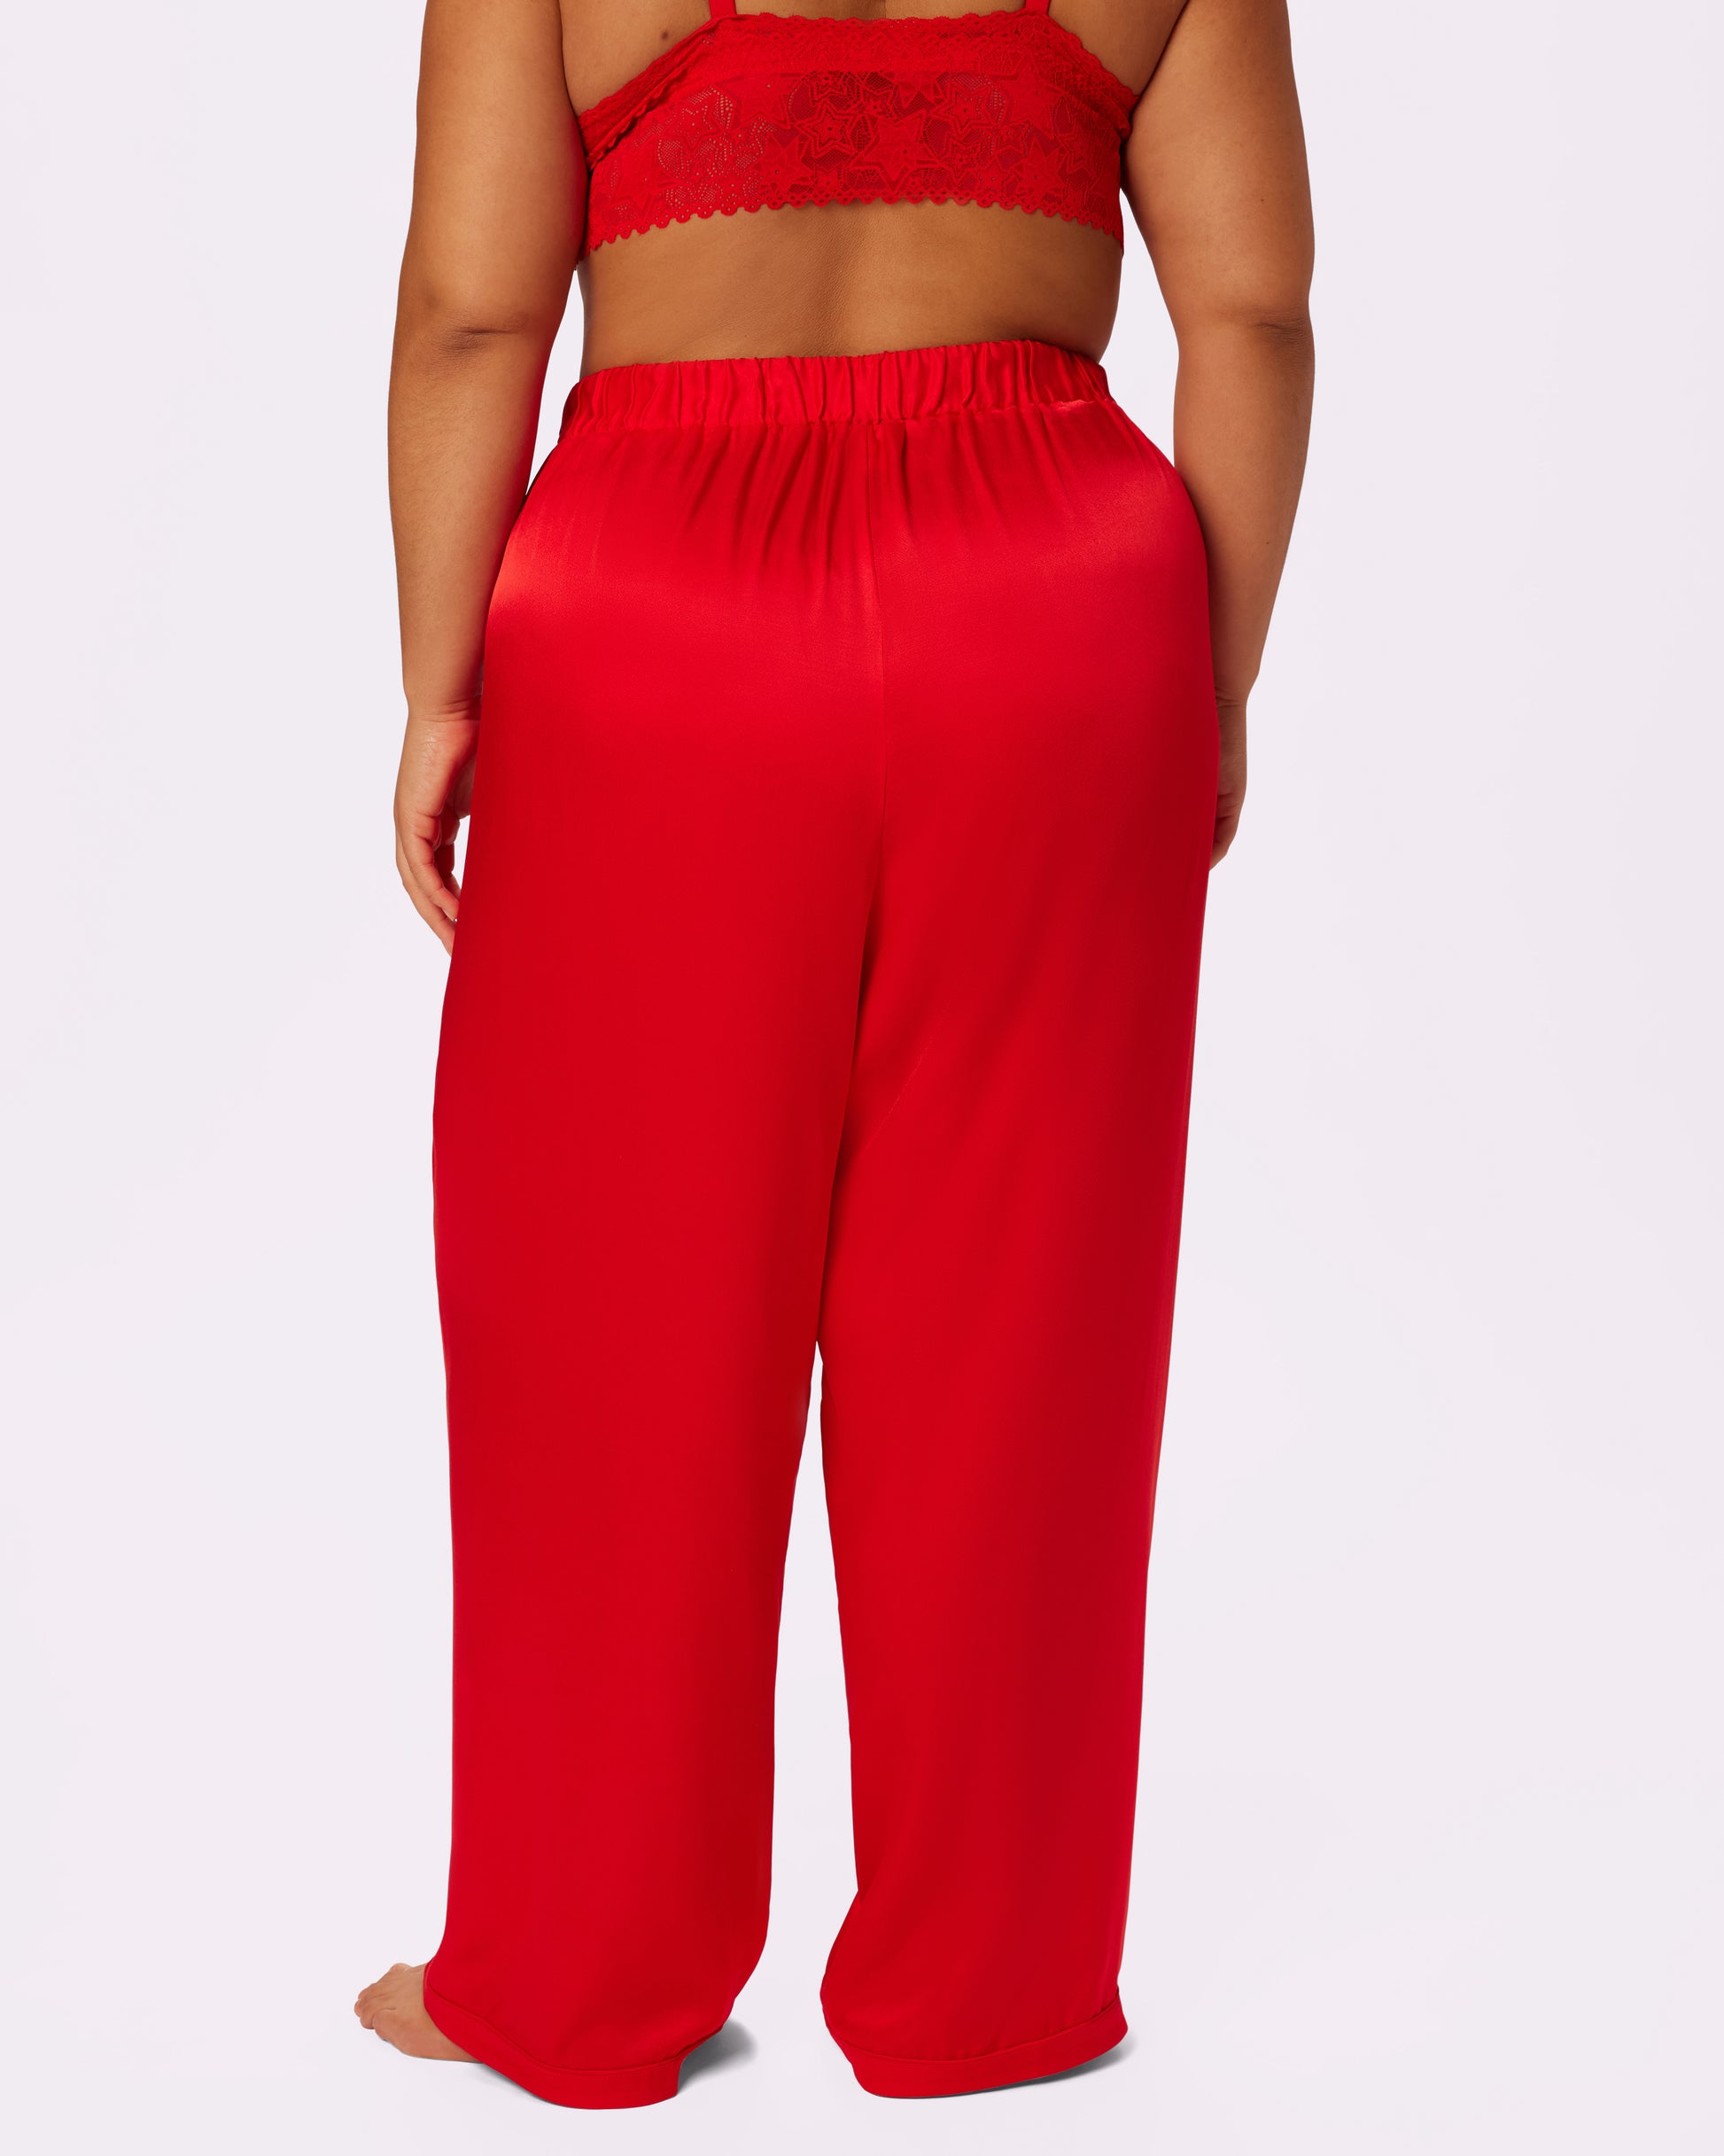 Abria Tie Front Flowy Pants - Red